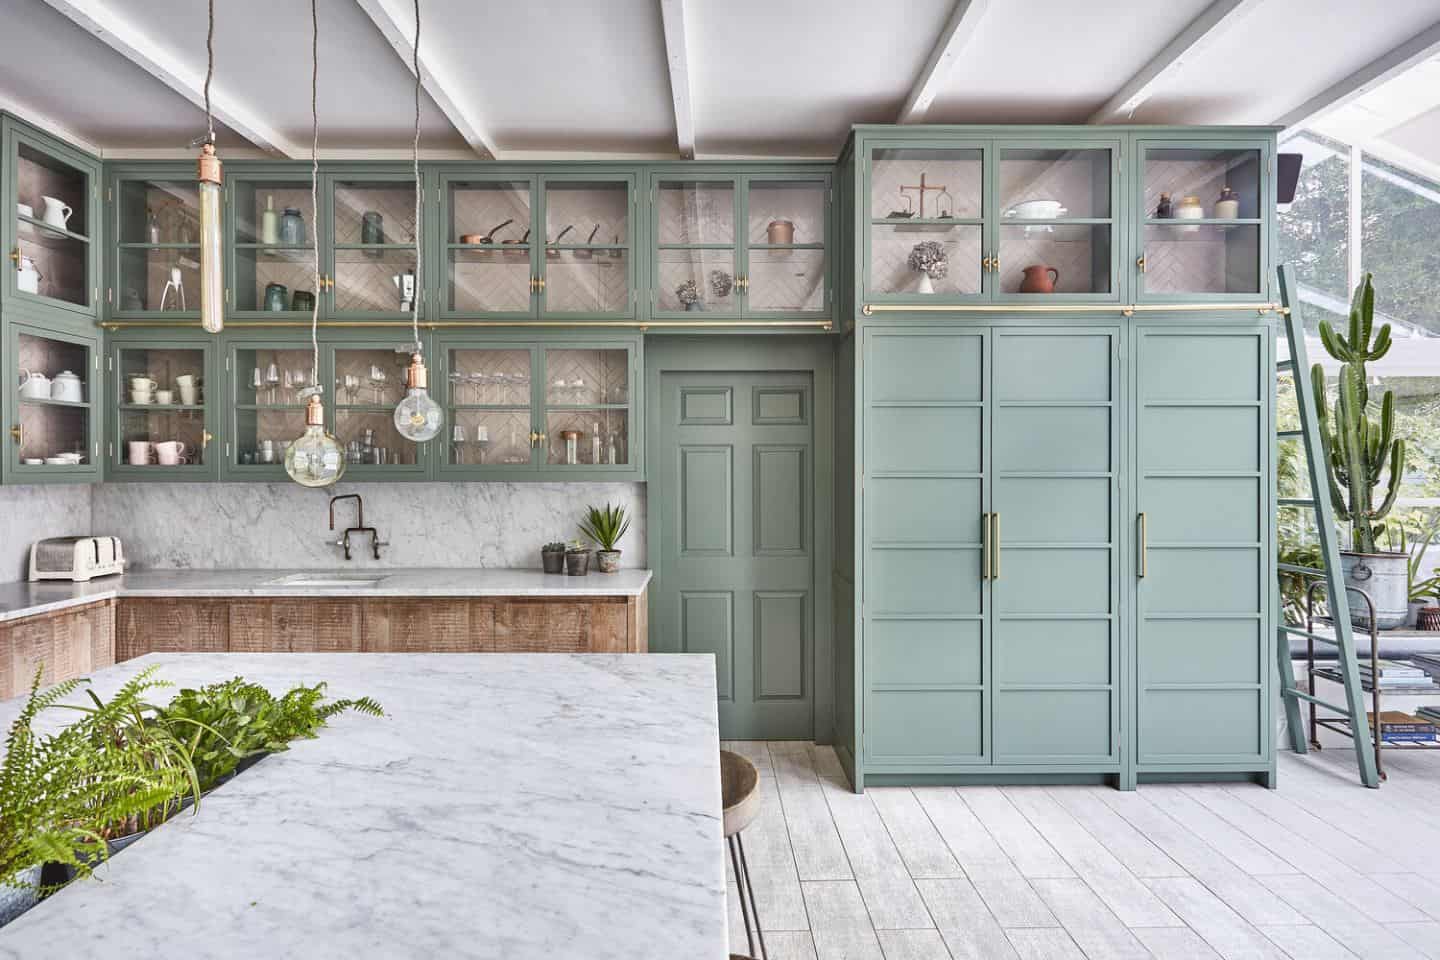 Urban Rustic Kitchens by Blakes London in a soft neo mint colour